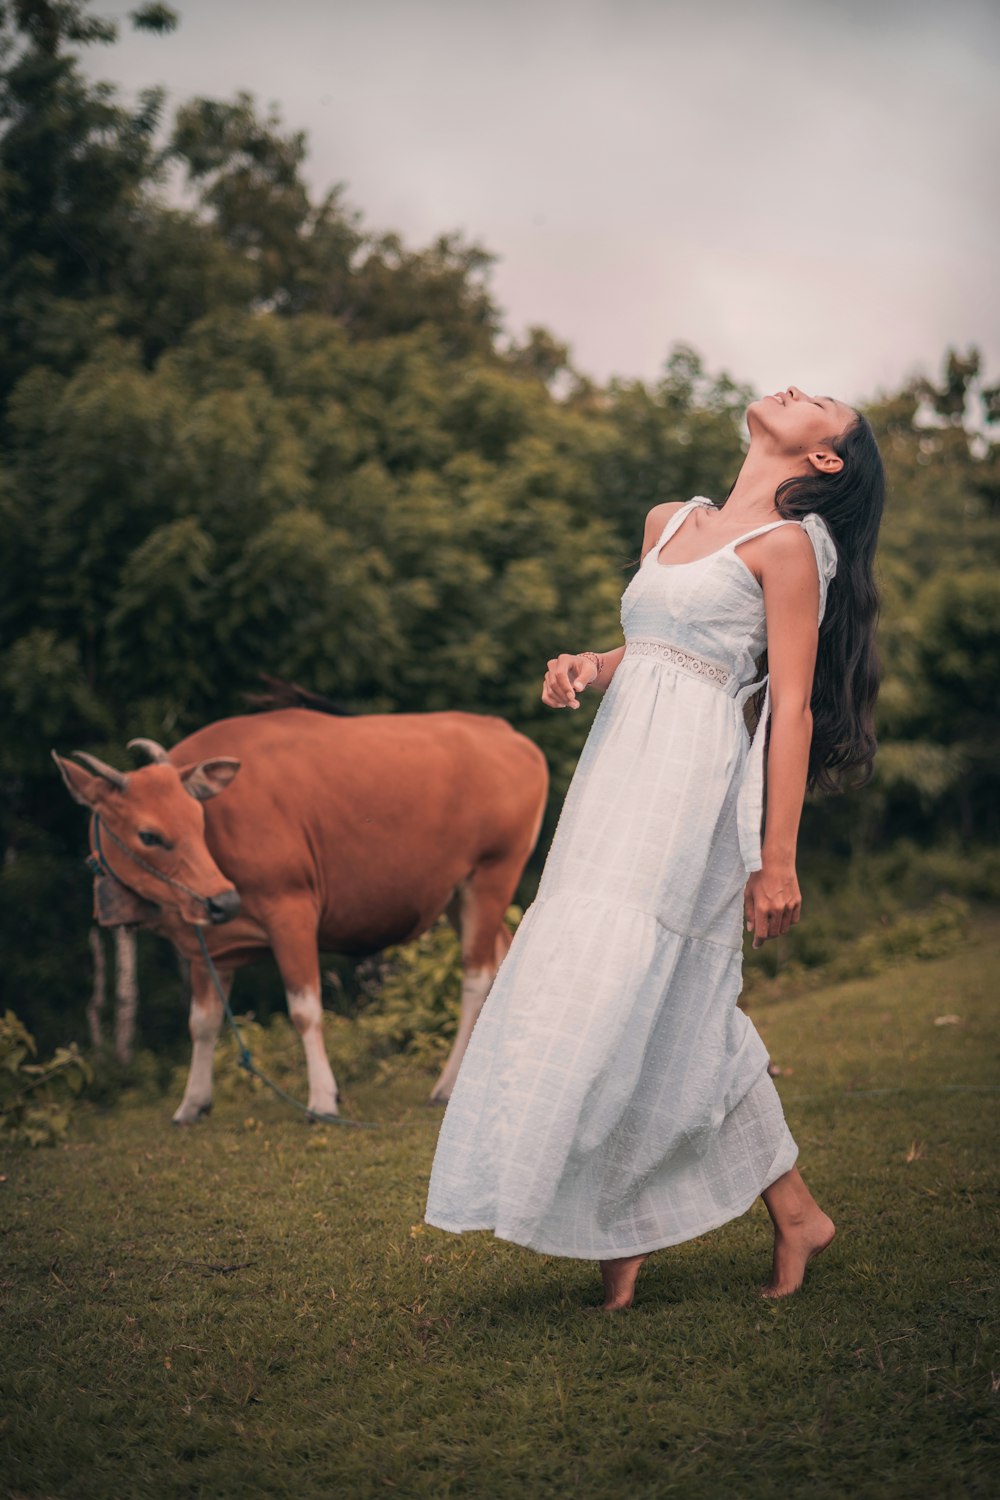 woman in white dress standing beside brown cow during daytime